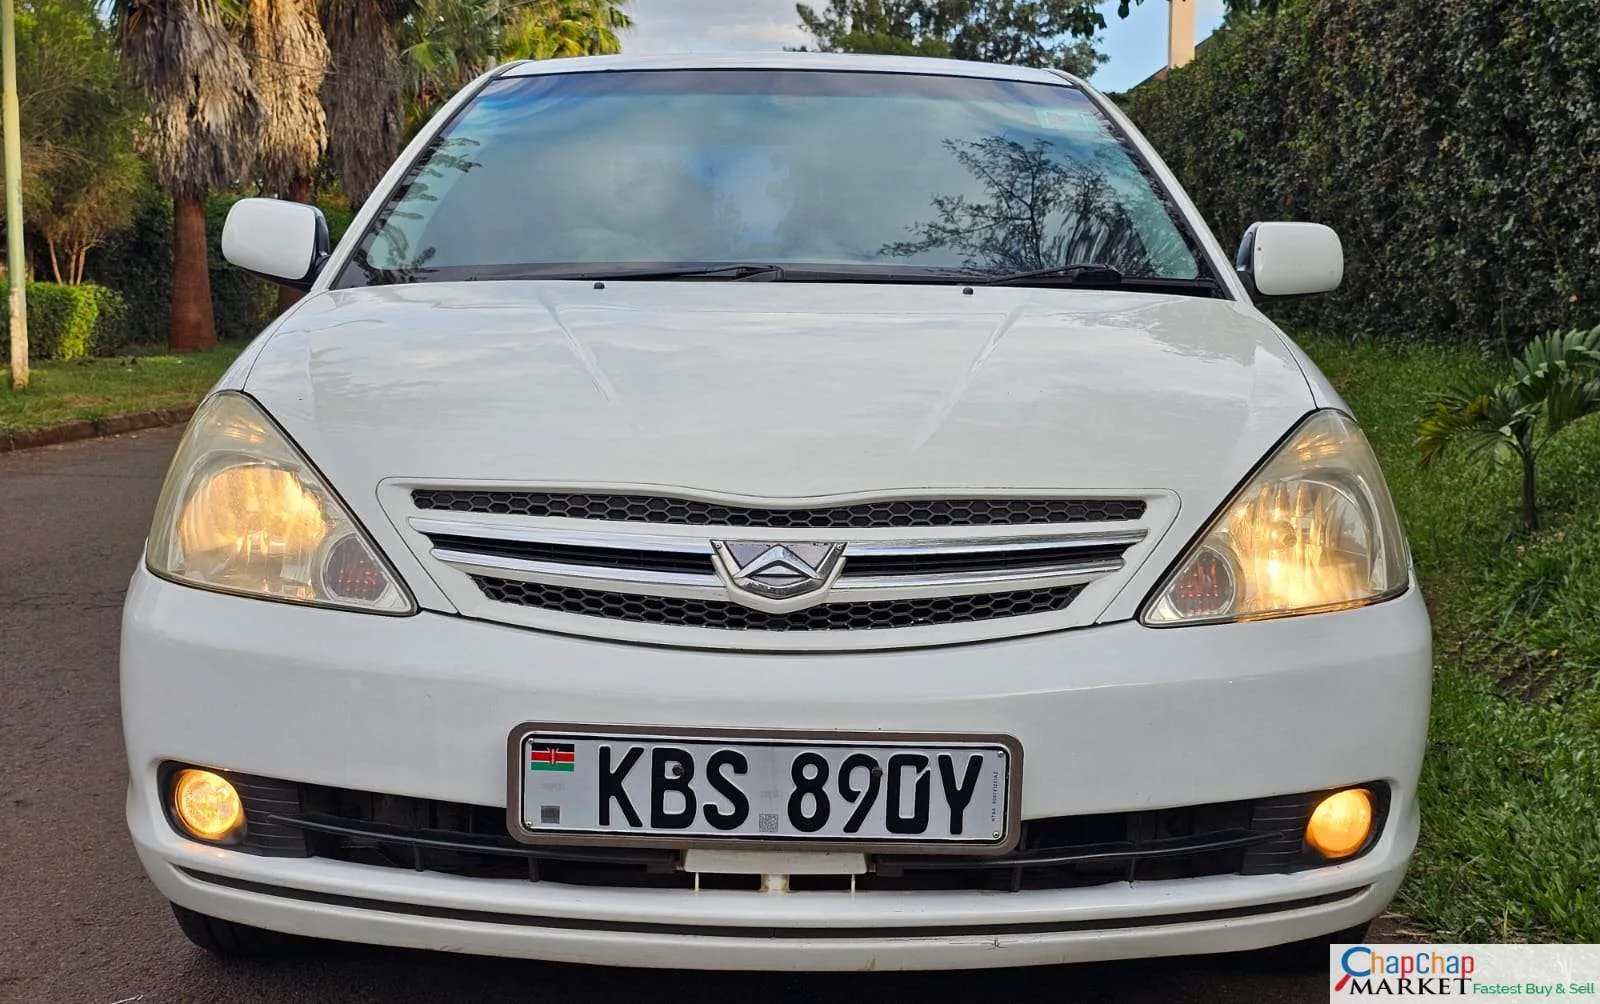 Toyota Allion kenya CLEAN You Pay 30% Deposit 70% INSTALLMENTS Allion for sale in kenya hire purchase installments EXCLUSIVE Trade in OK 🔥